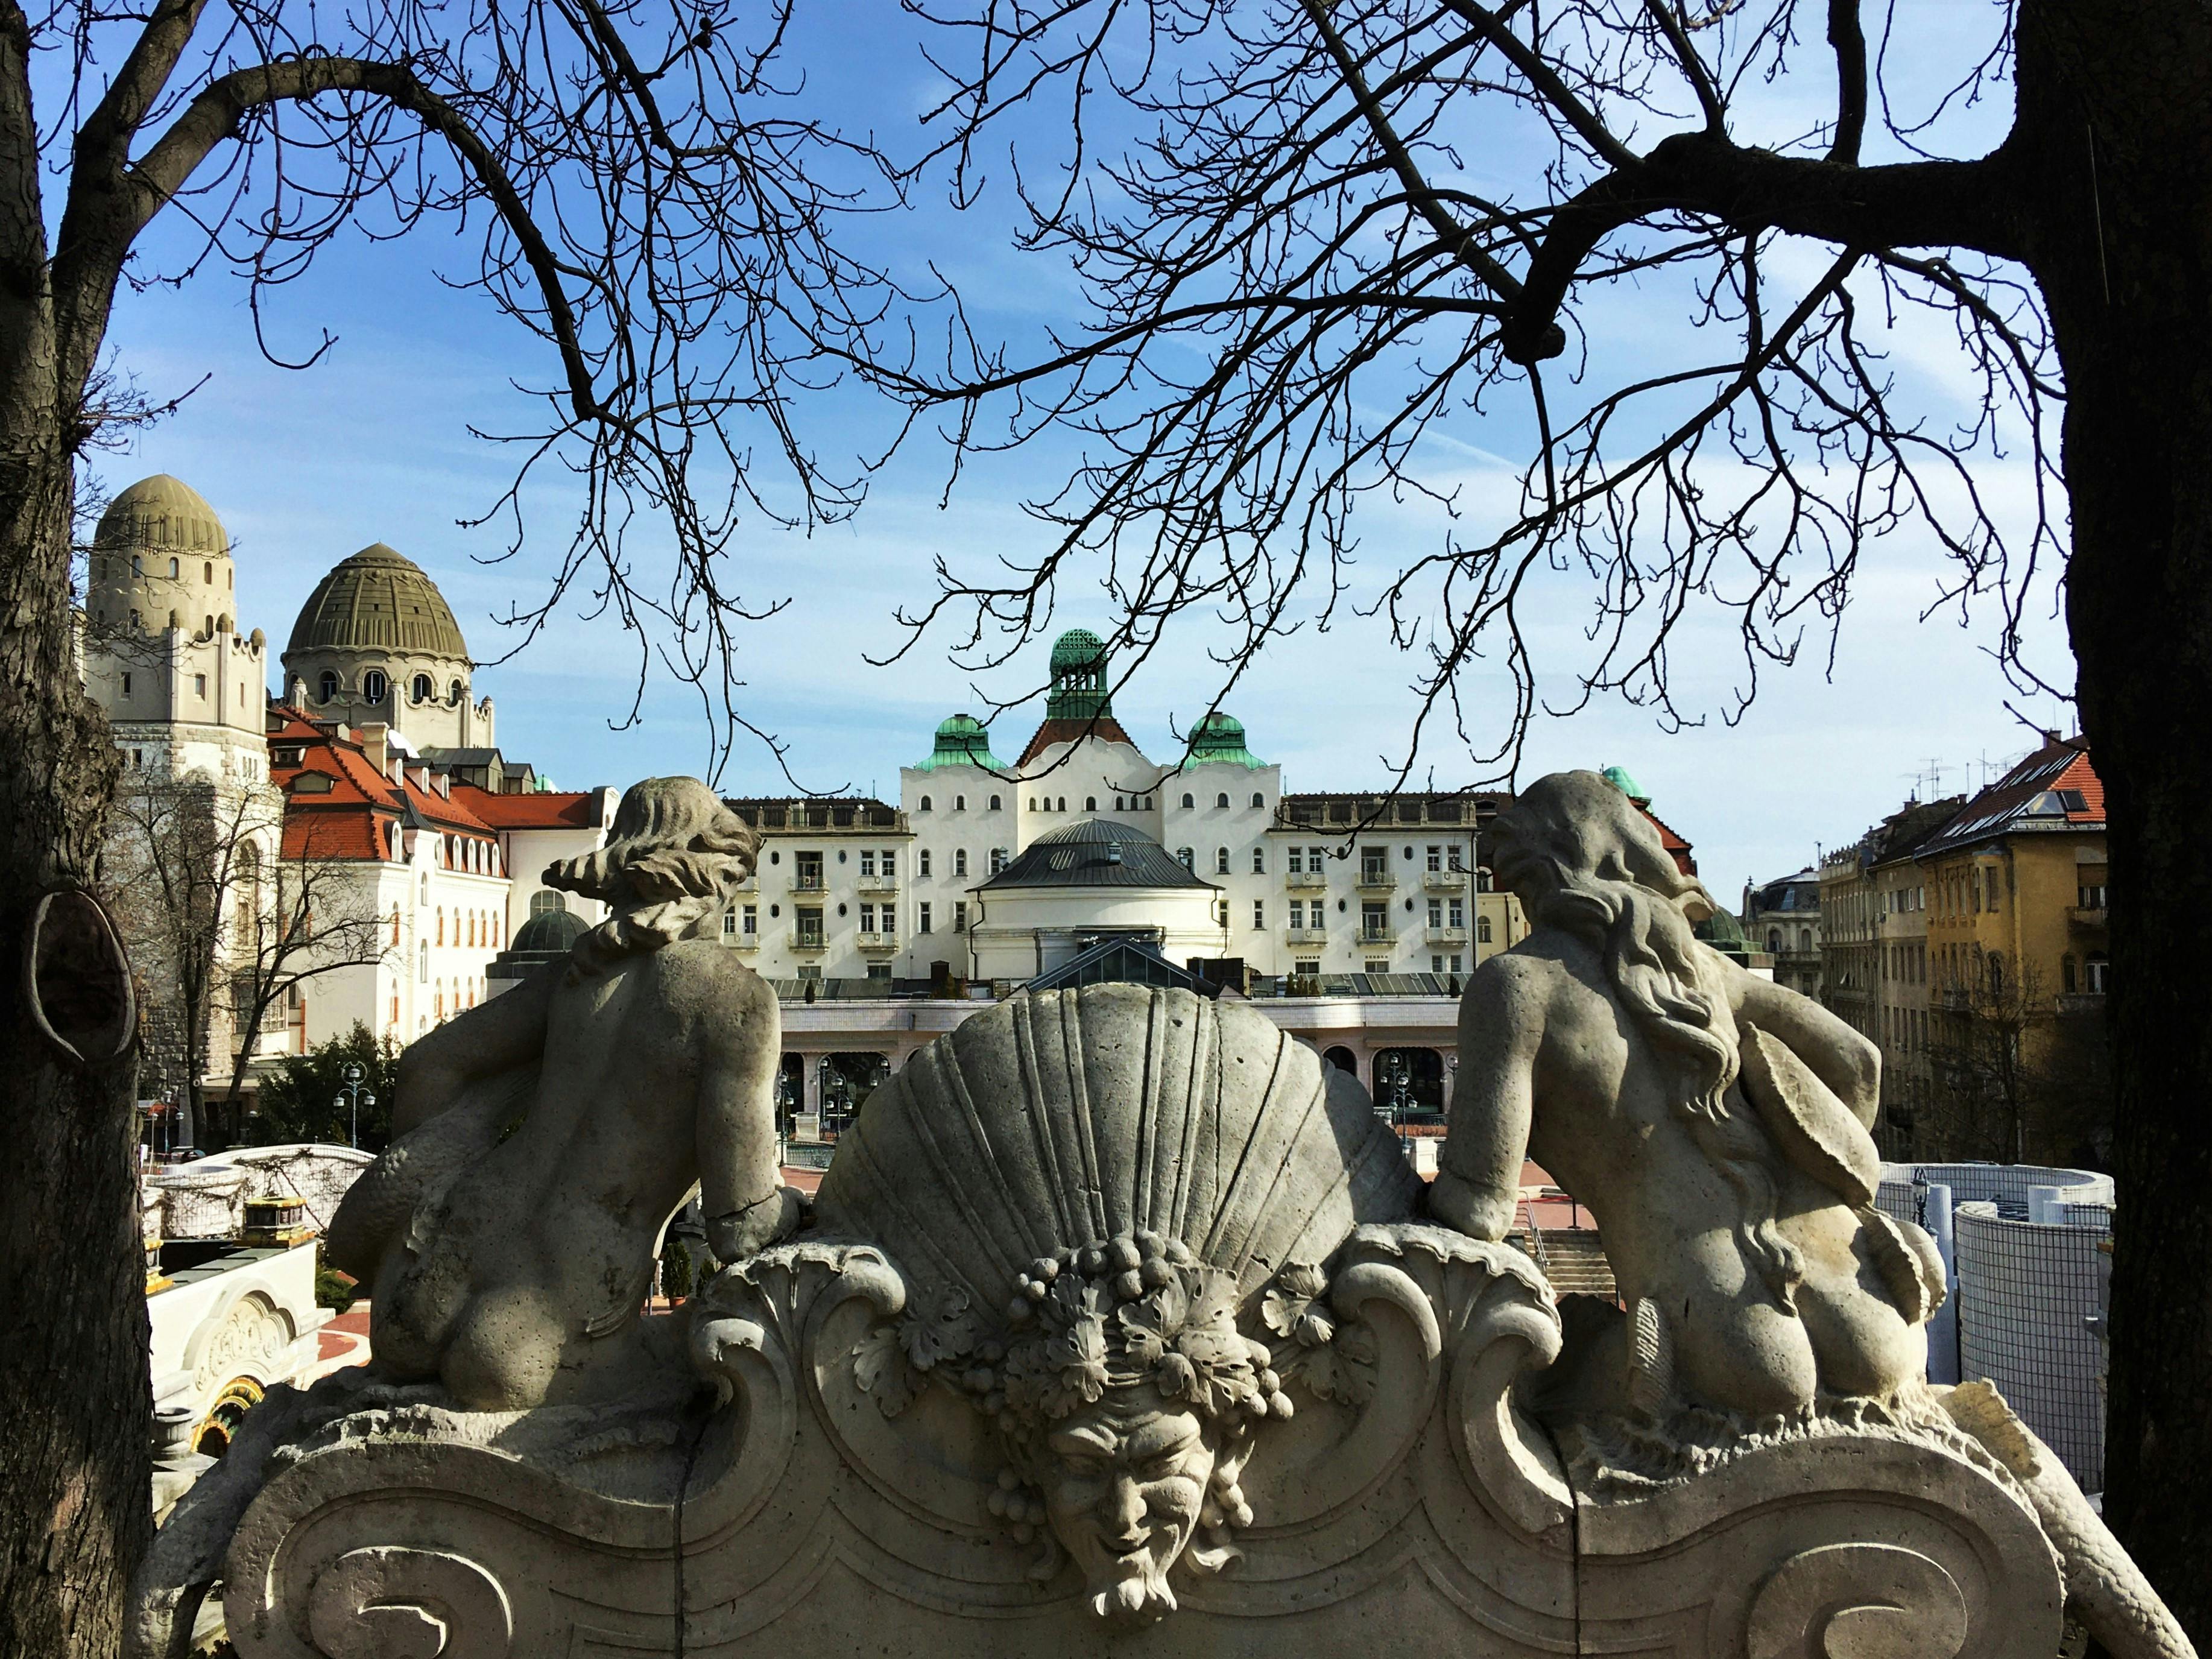 Self-guided discovery walk in Budapest’s Gellért Hill